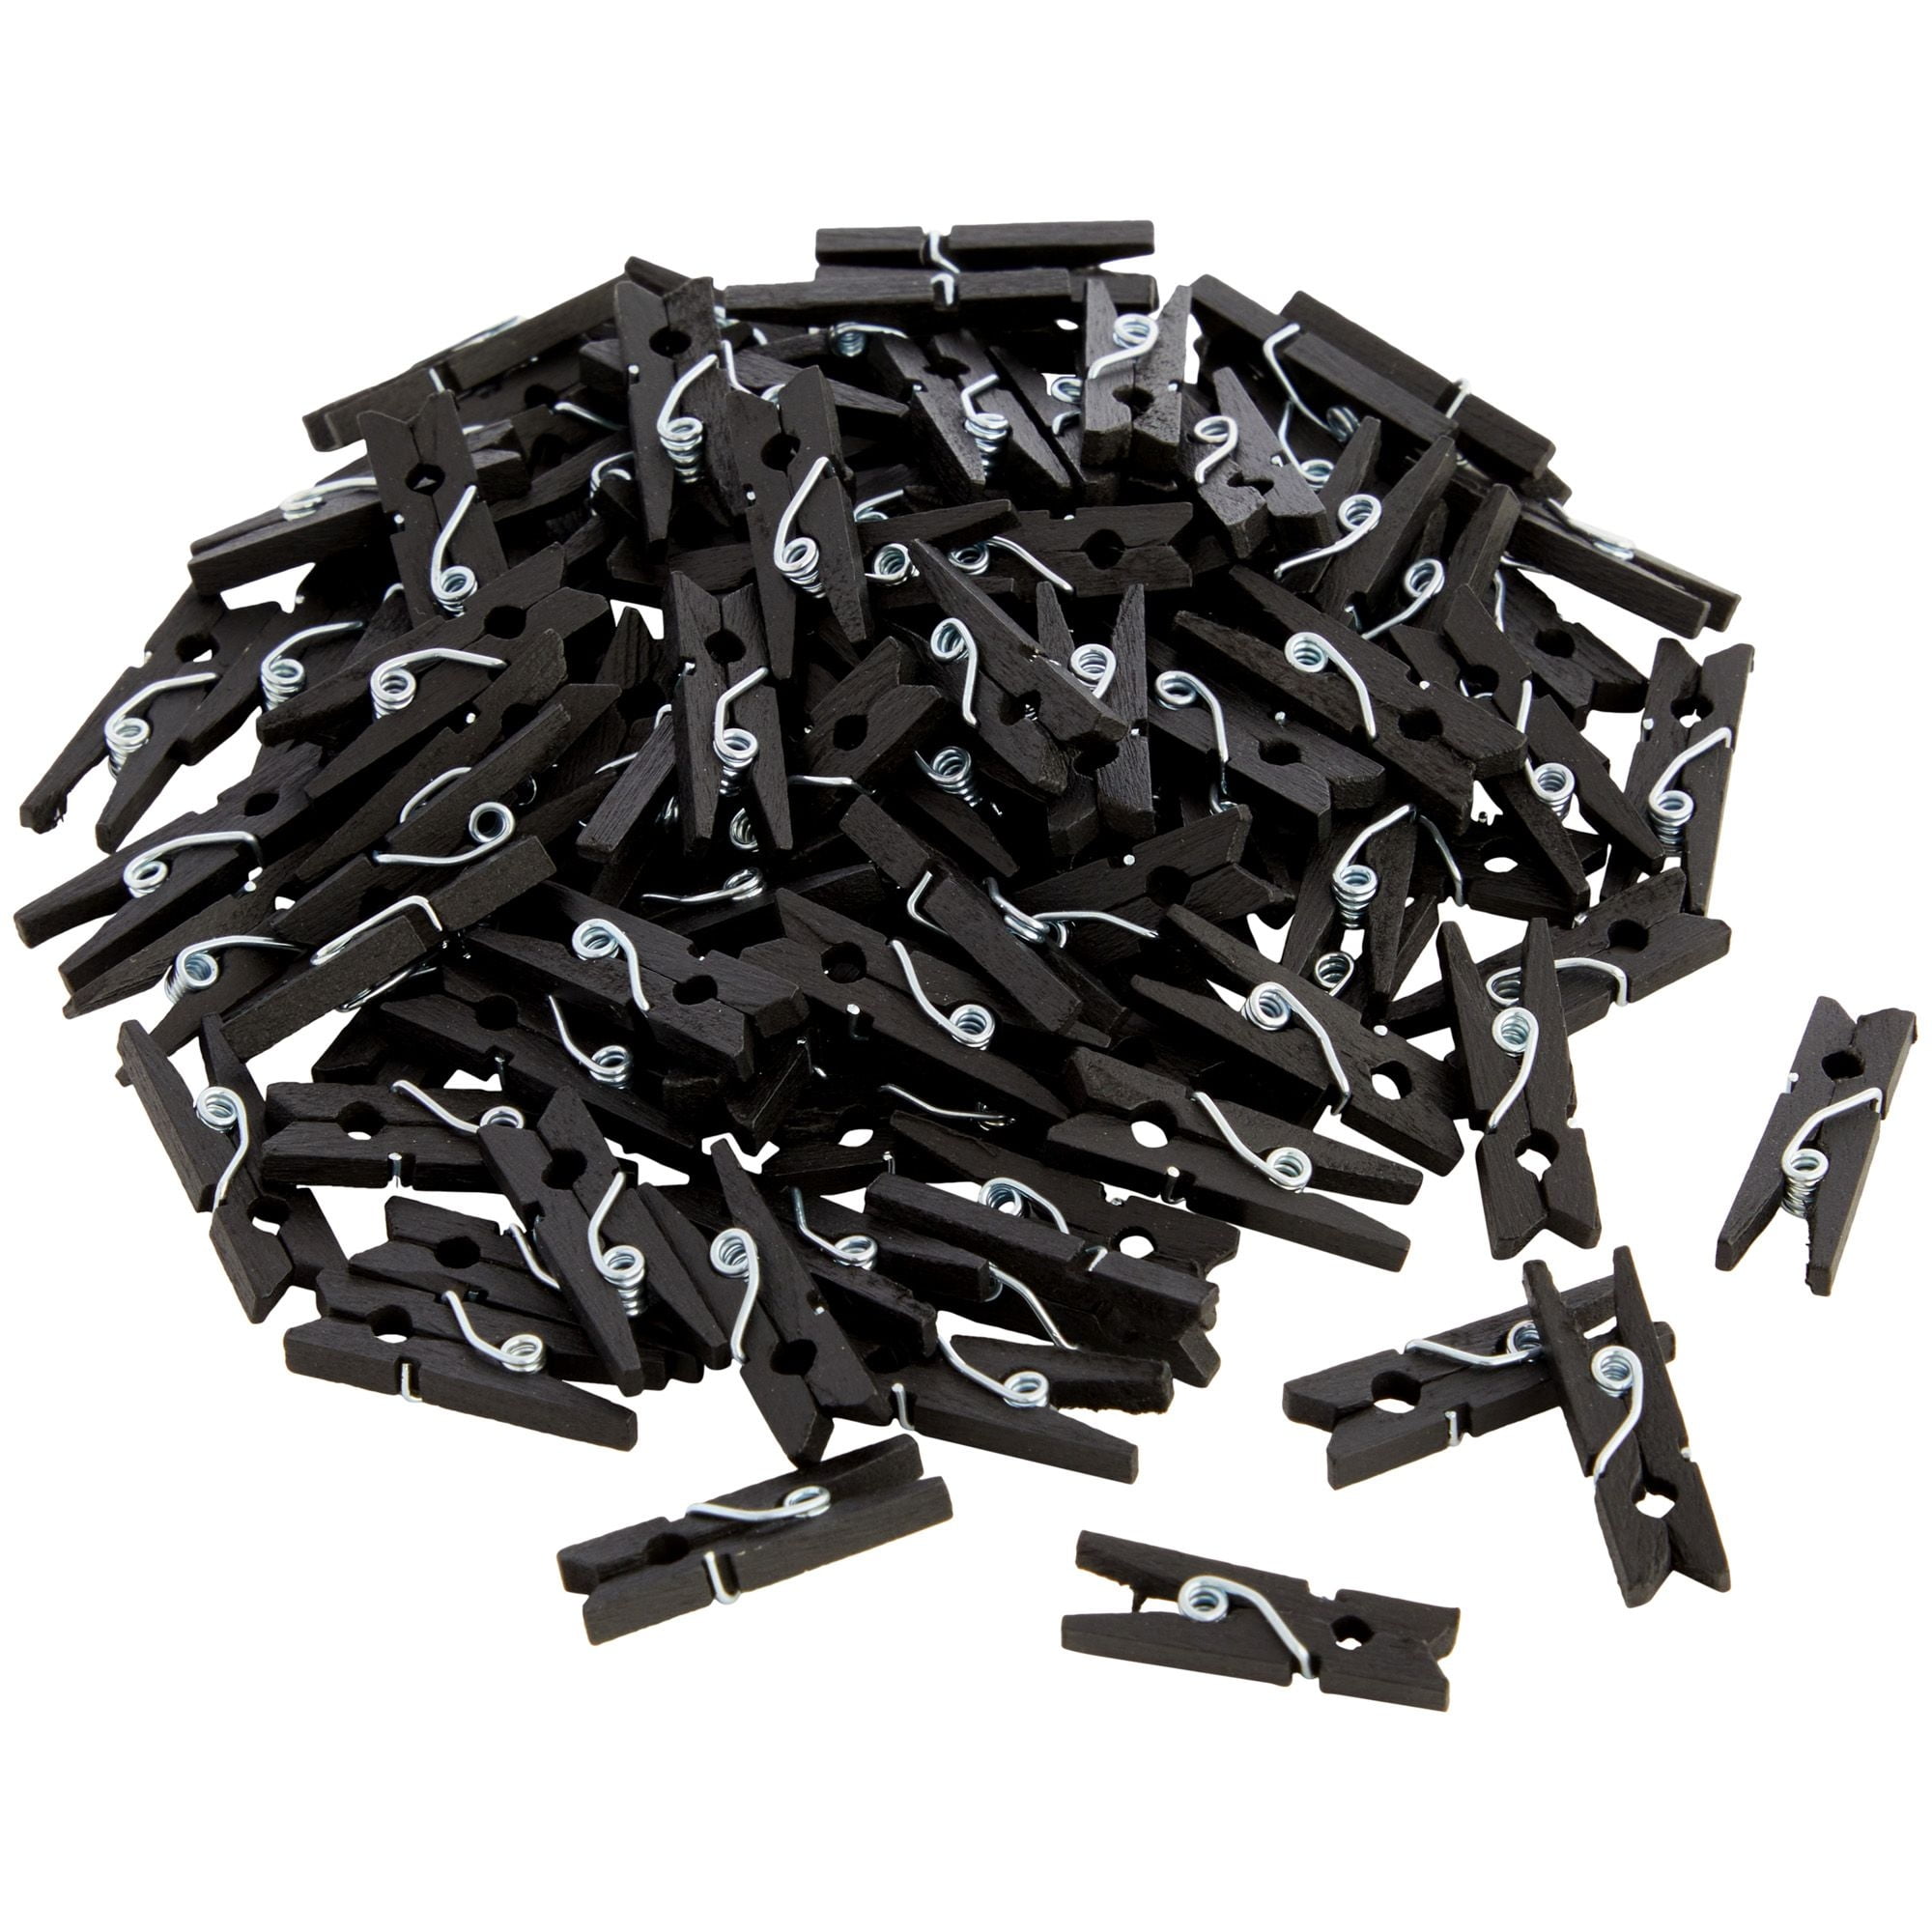 100 Pack Wooden Mini Clothes Pins for Photos, 1 inch Black Clips for Scrapbooking, Arts and Crafts